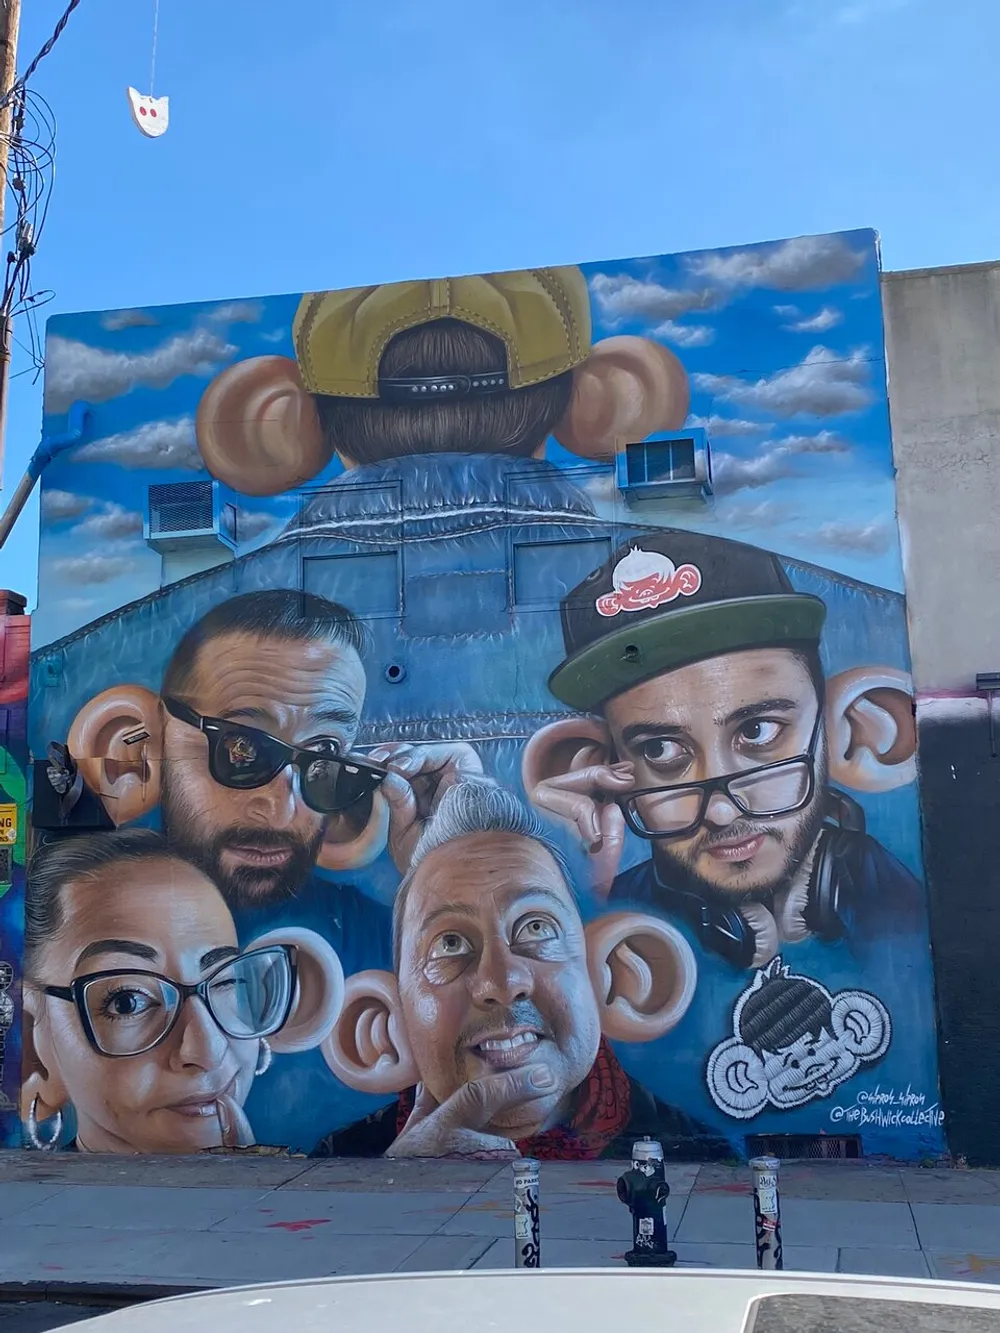 This image features a vibrant mural of four human faces with exaggerated ears and playful expressions along with a character wearing a cap viewed from the back set against a blue sky with clouds